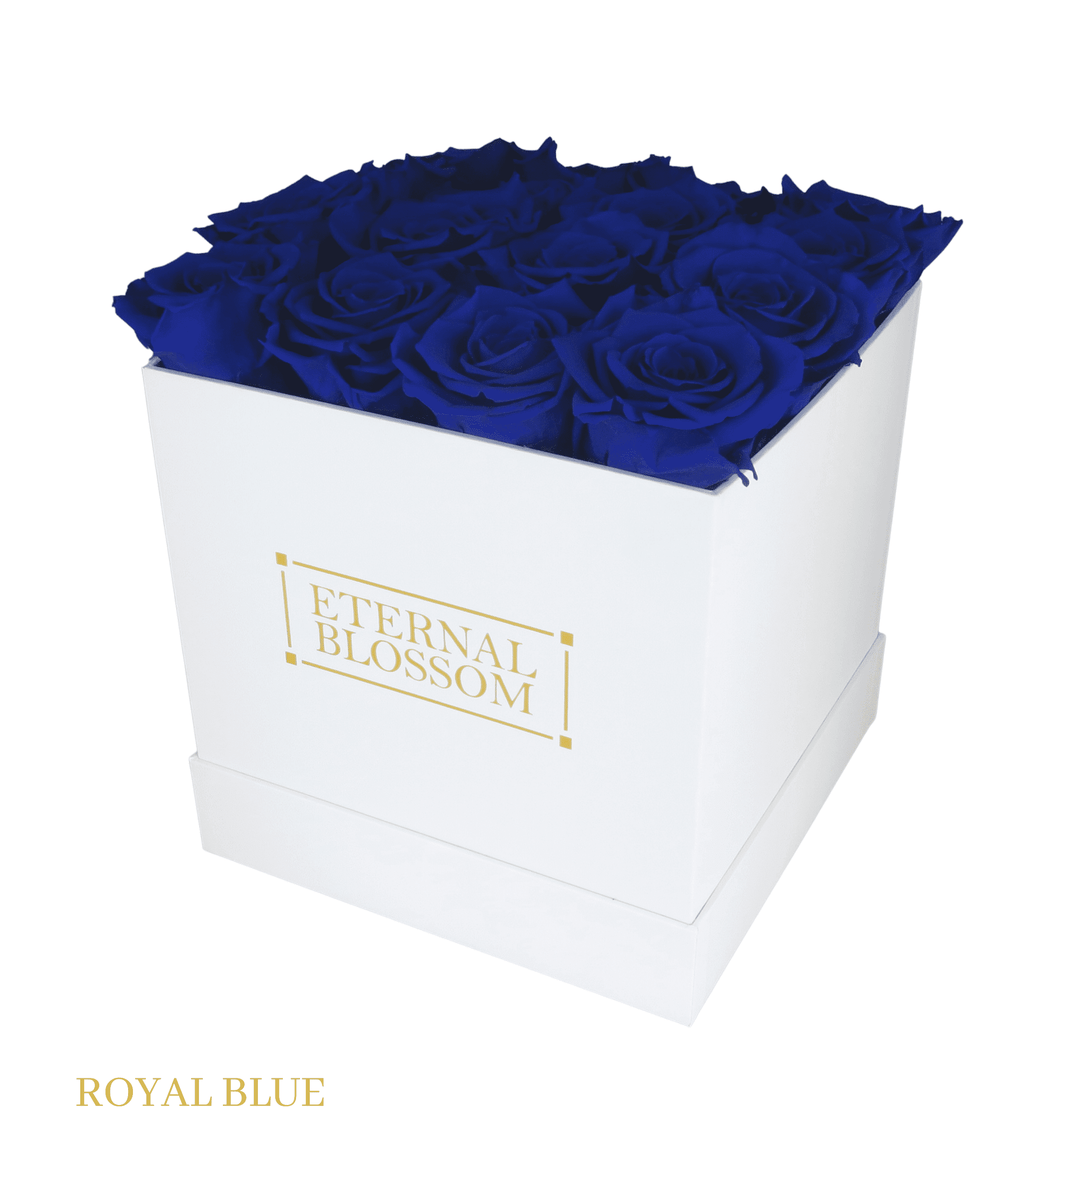 16 Piece Blossom Box - White Box - All Colours of Year Lasting Infinity Roses - Eternal Blossom